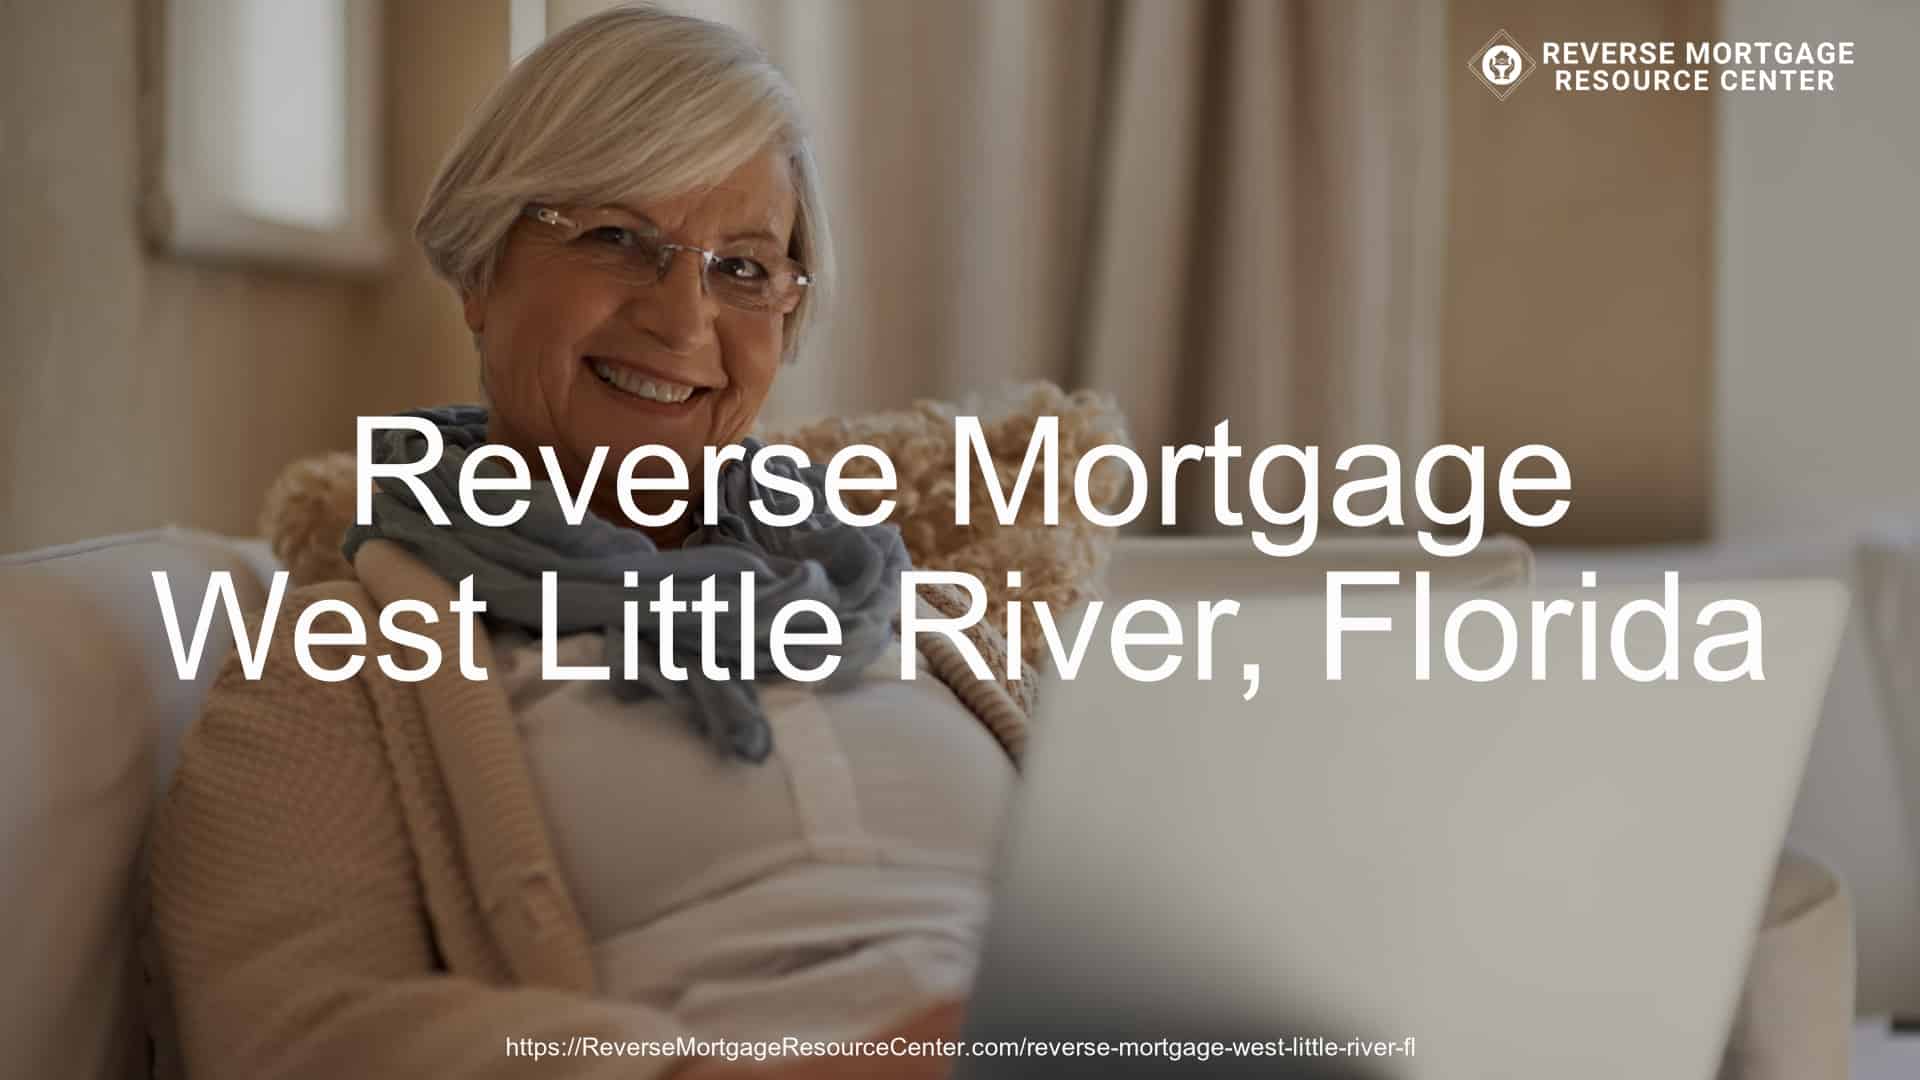 Reverse Mortgage Loans in West Little River Florida